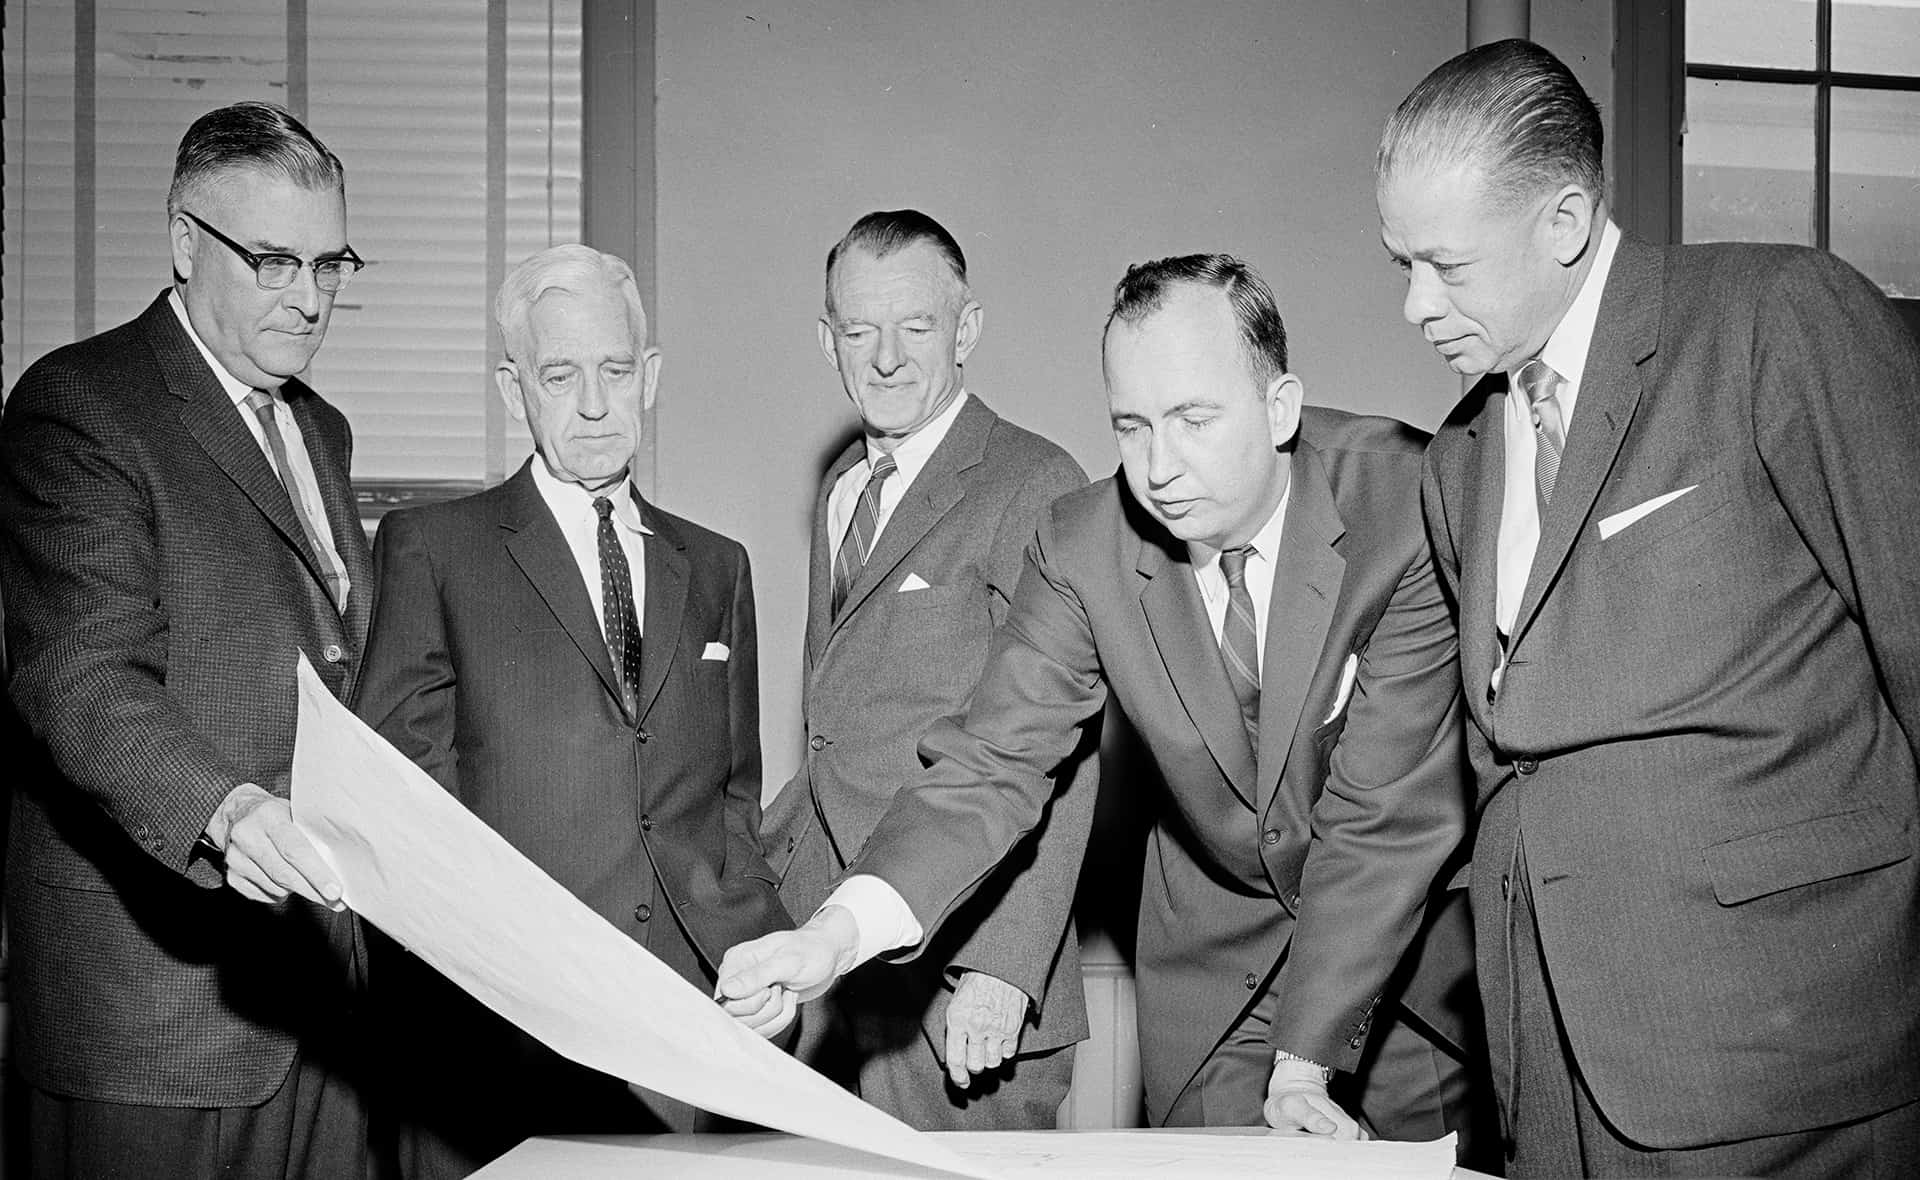 Durham Urban Renewal Commission Members, 1960. All were white men except for John Wheeler, President of Mechanics and Farmers Bank. Courtesy Durham Herald Co. Newspaper, North Carolina Collection, Louis Round Wilson Special Collections Library, University of North Carolina at Chapel Hill